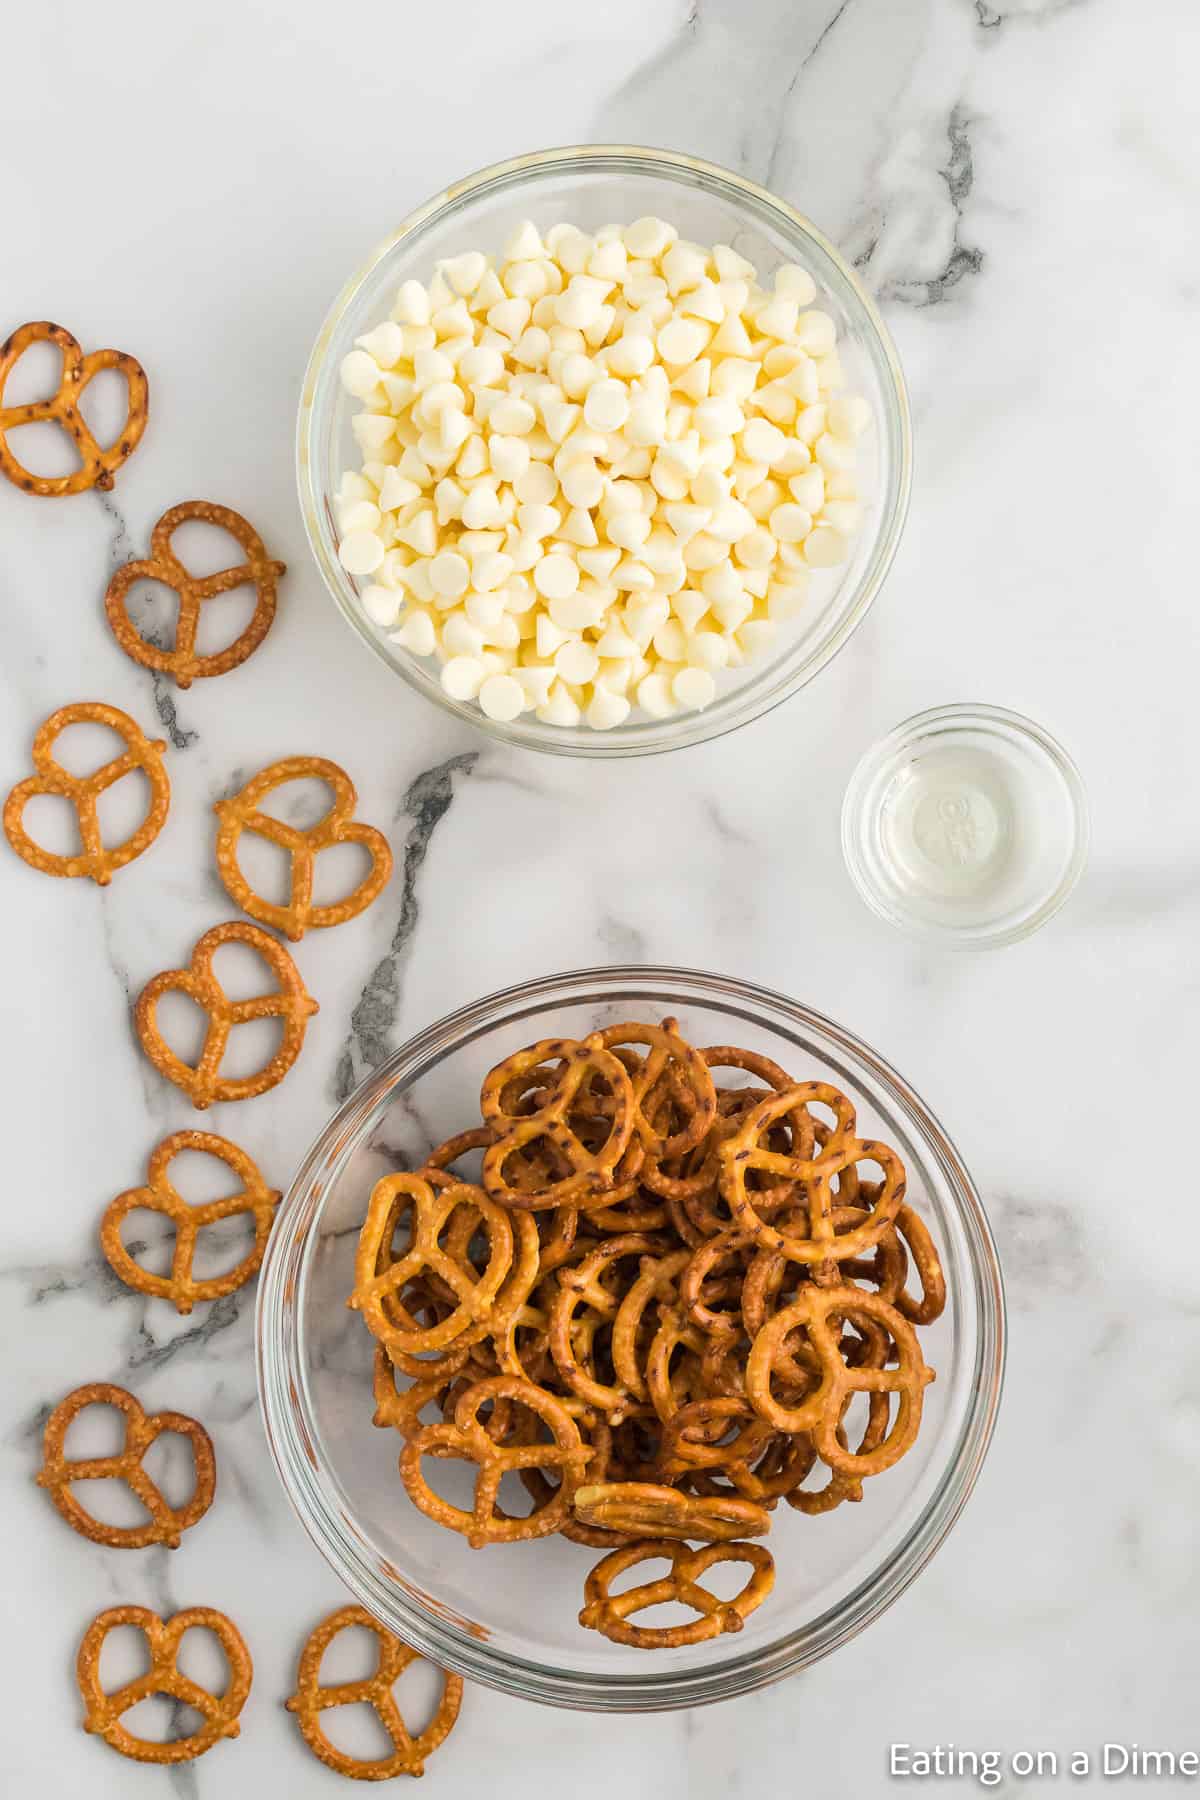 White Chocolate Covered Pretzels ingredients - pretzels twists, white chocolate chips, and vegetable oil